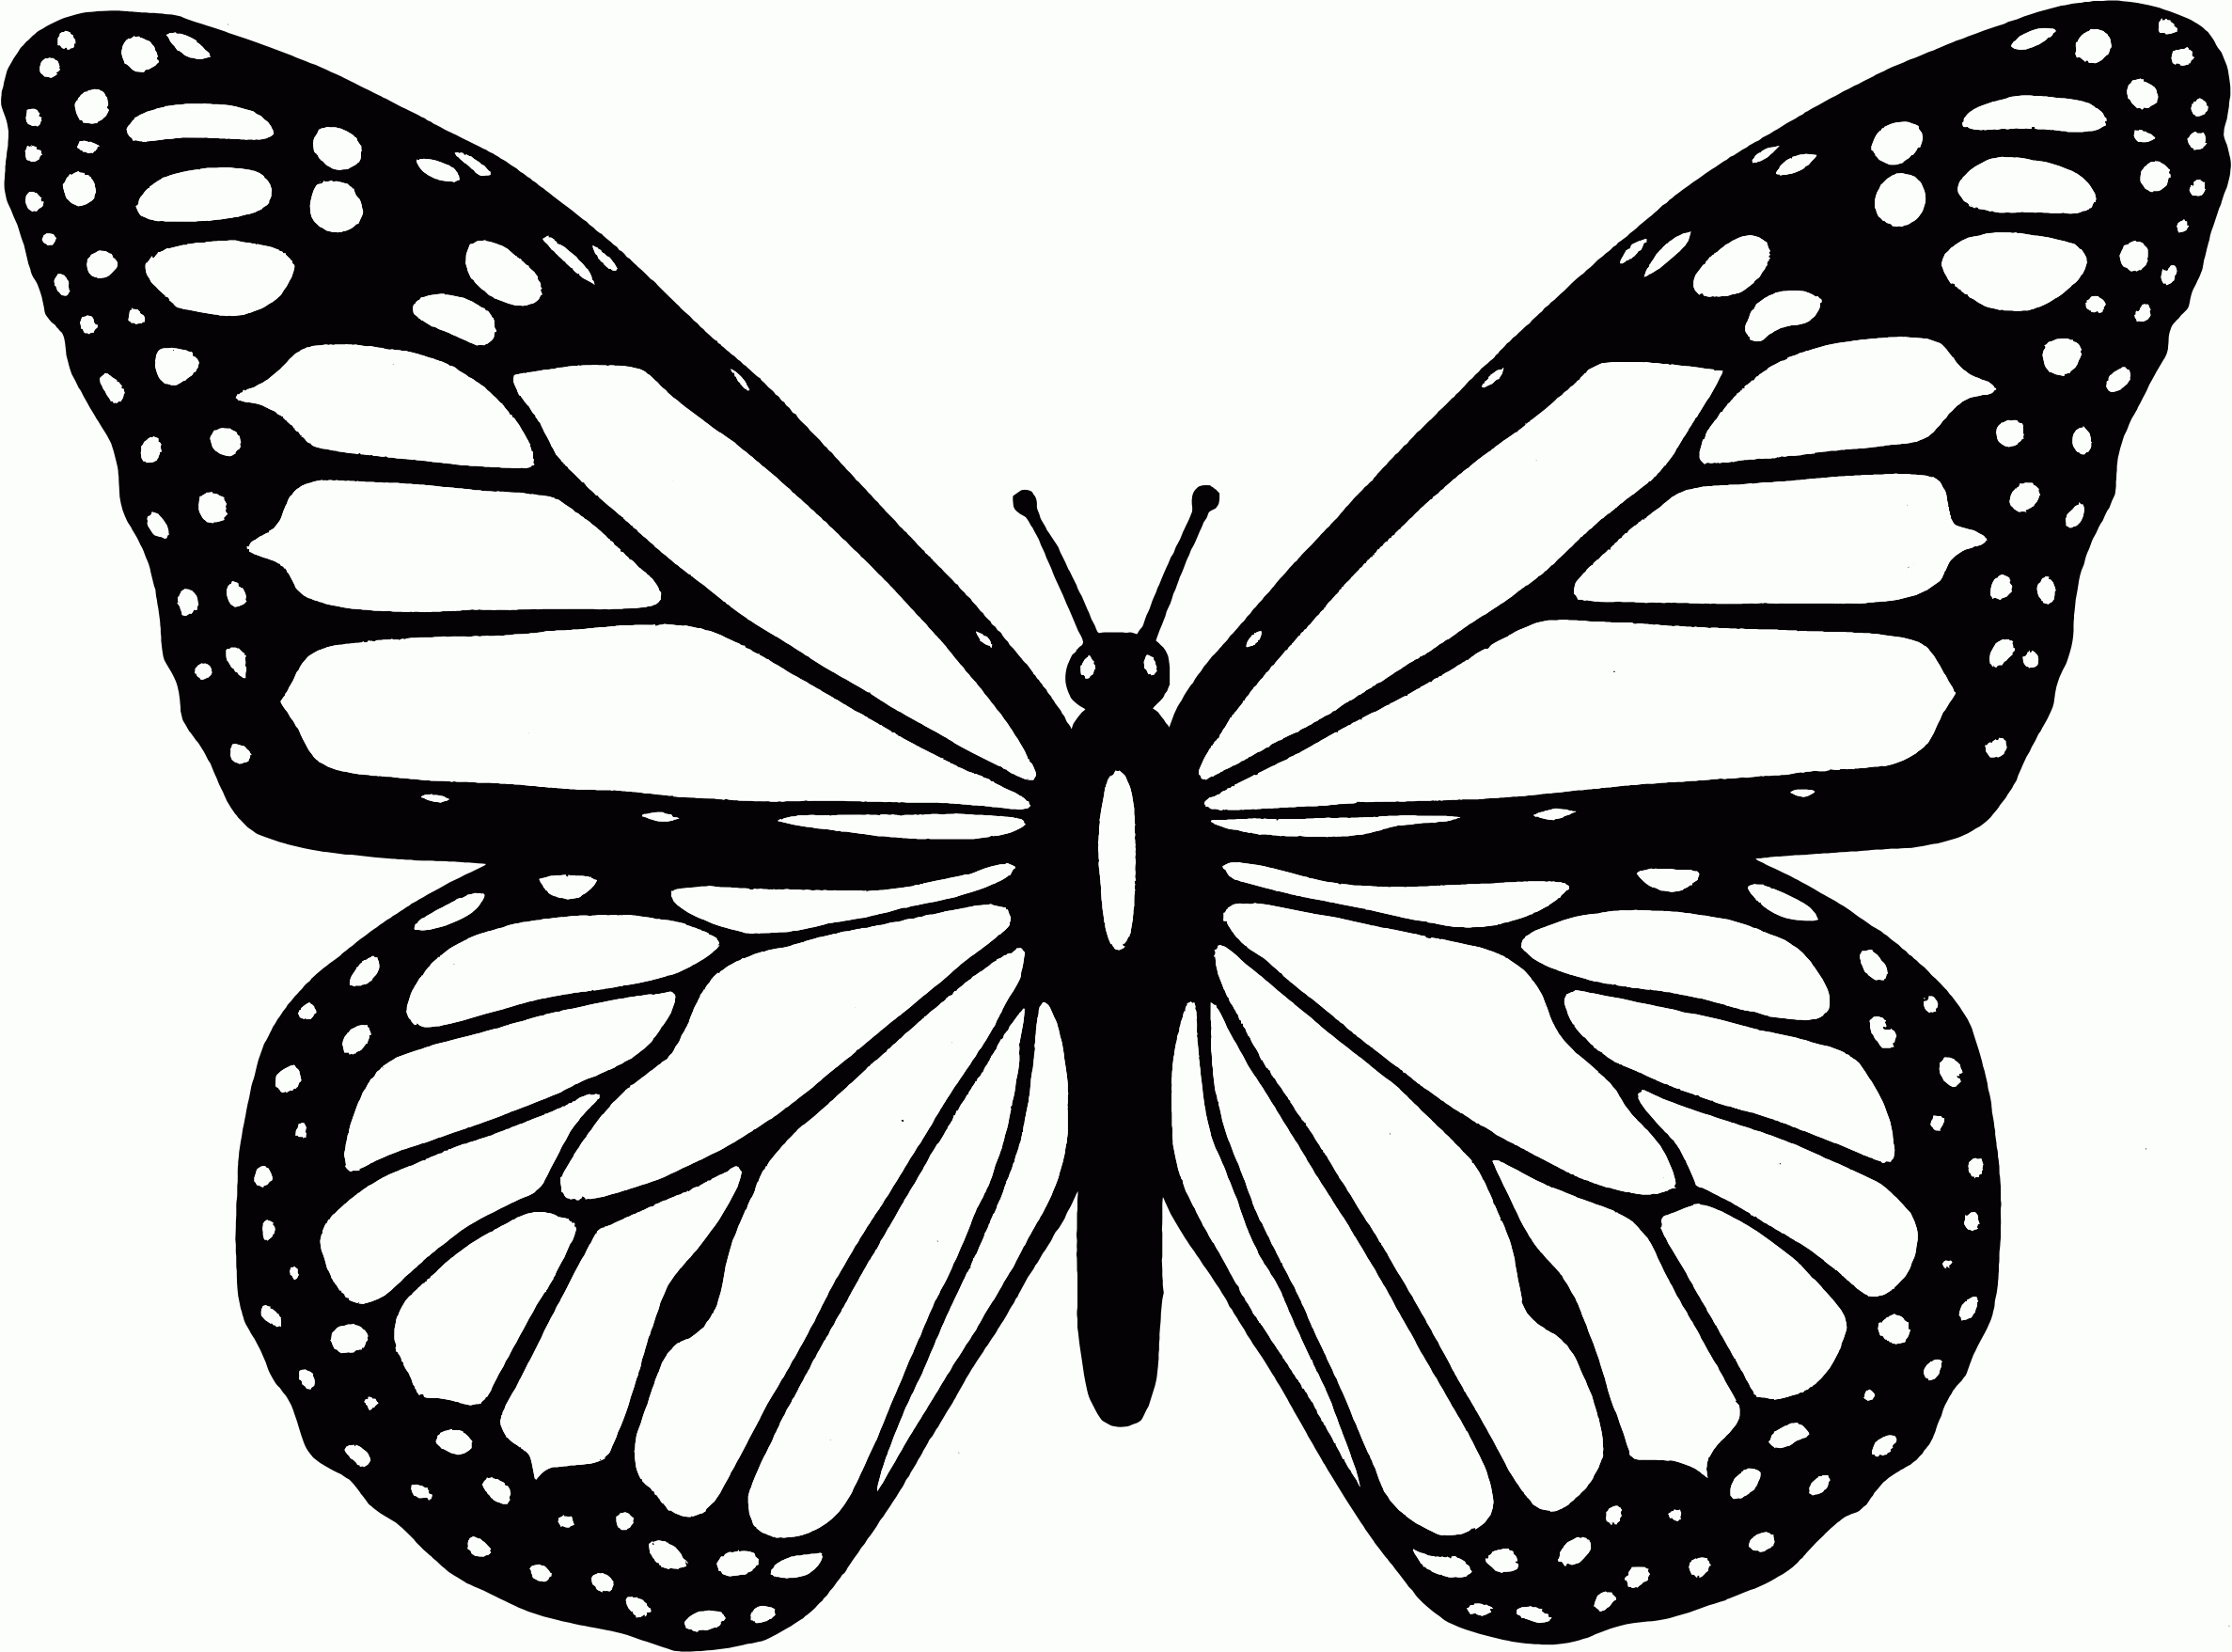 Monarch Butterfly Coloring Page   High Quality Coloring Pages ...